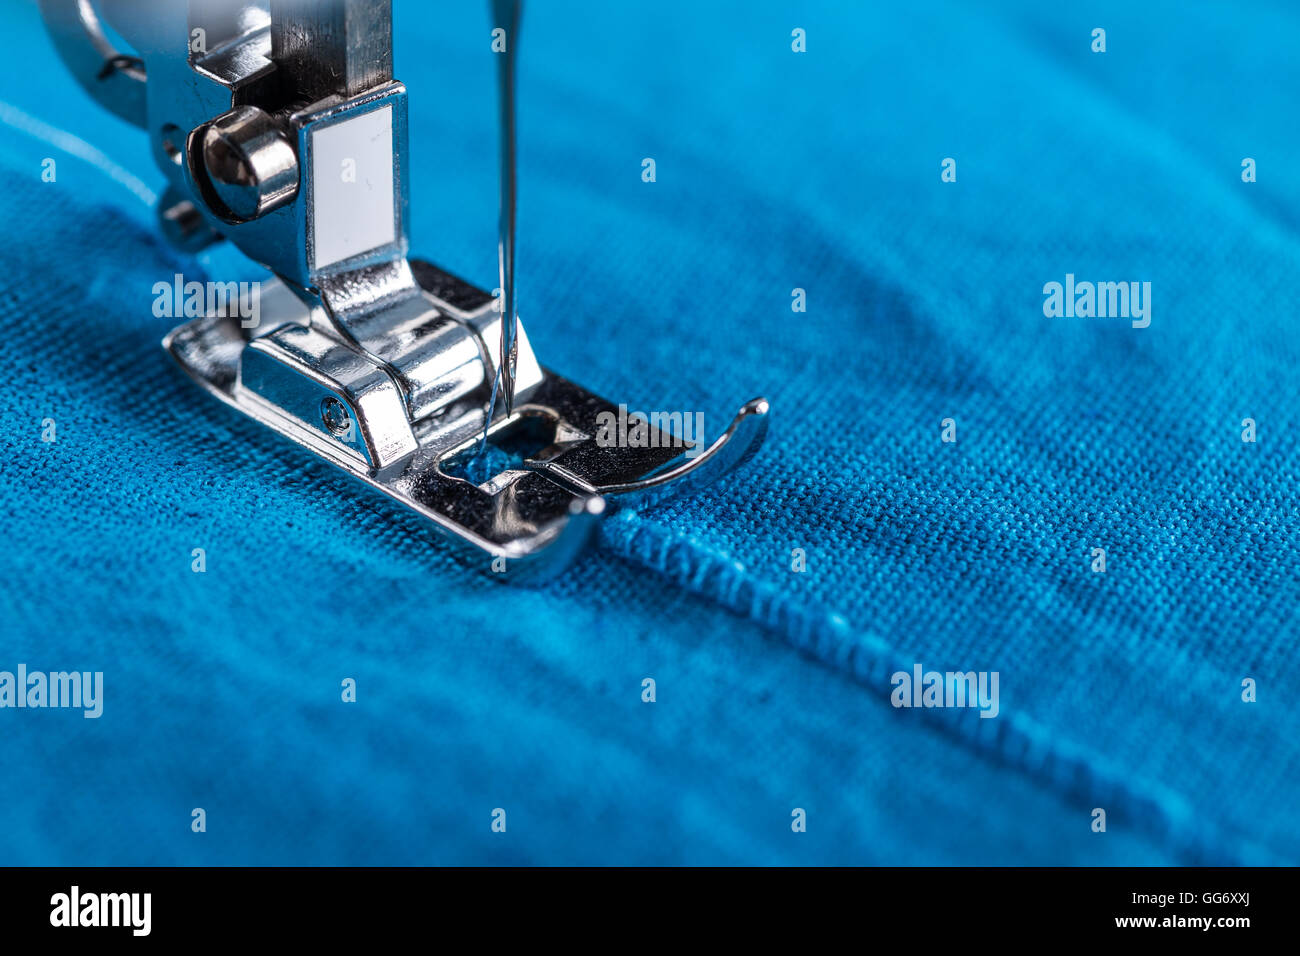 Background Of Close Up Sewing Machine Parts And Tools As Follows Needle,  Presser Foot, Threads, Bobbin, Replace Buttons On Jean Fabric. Stock Photo,  Picture and Royalty Free Image. Image 83813242.